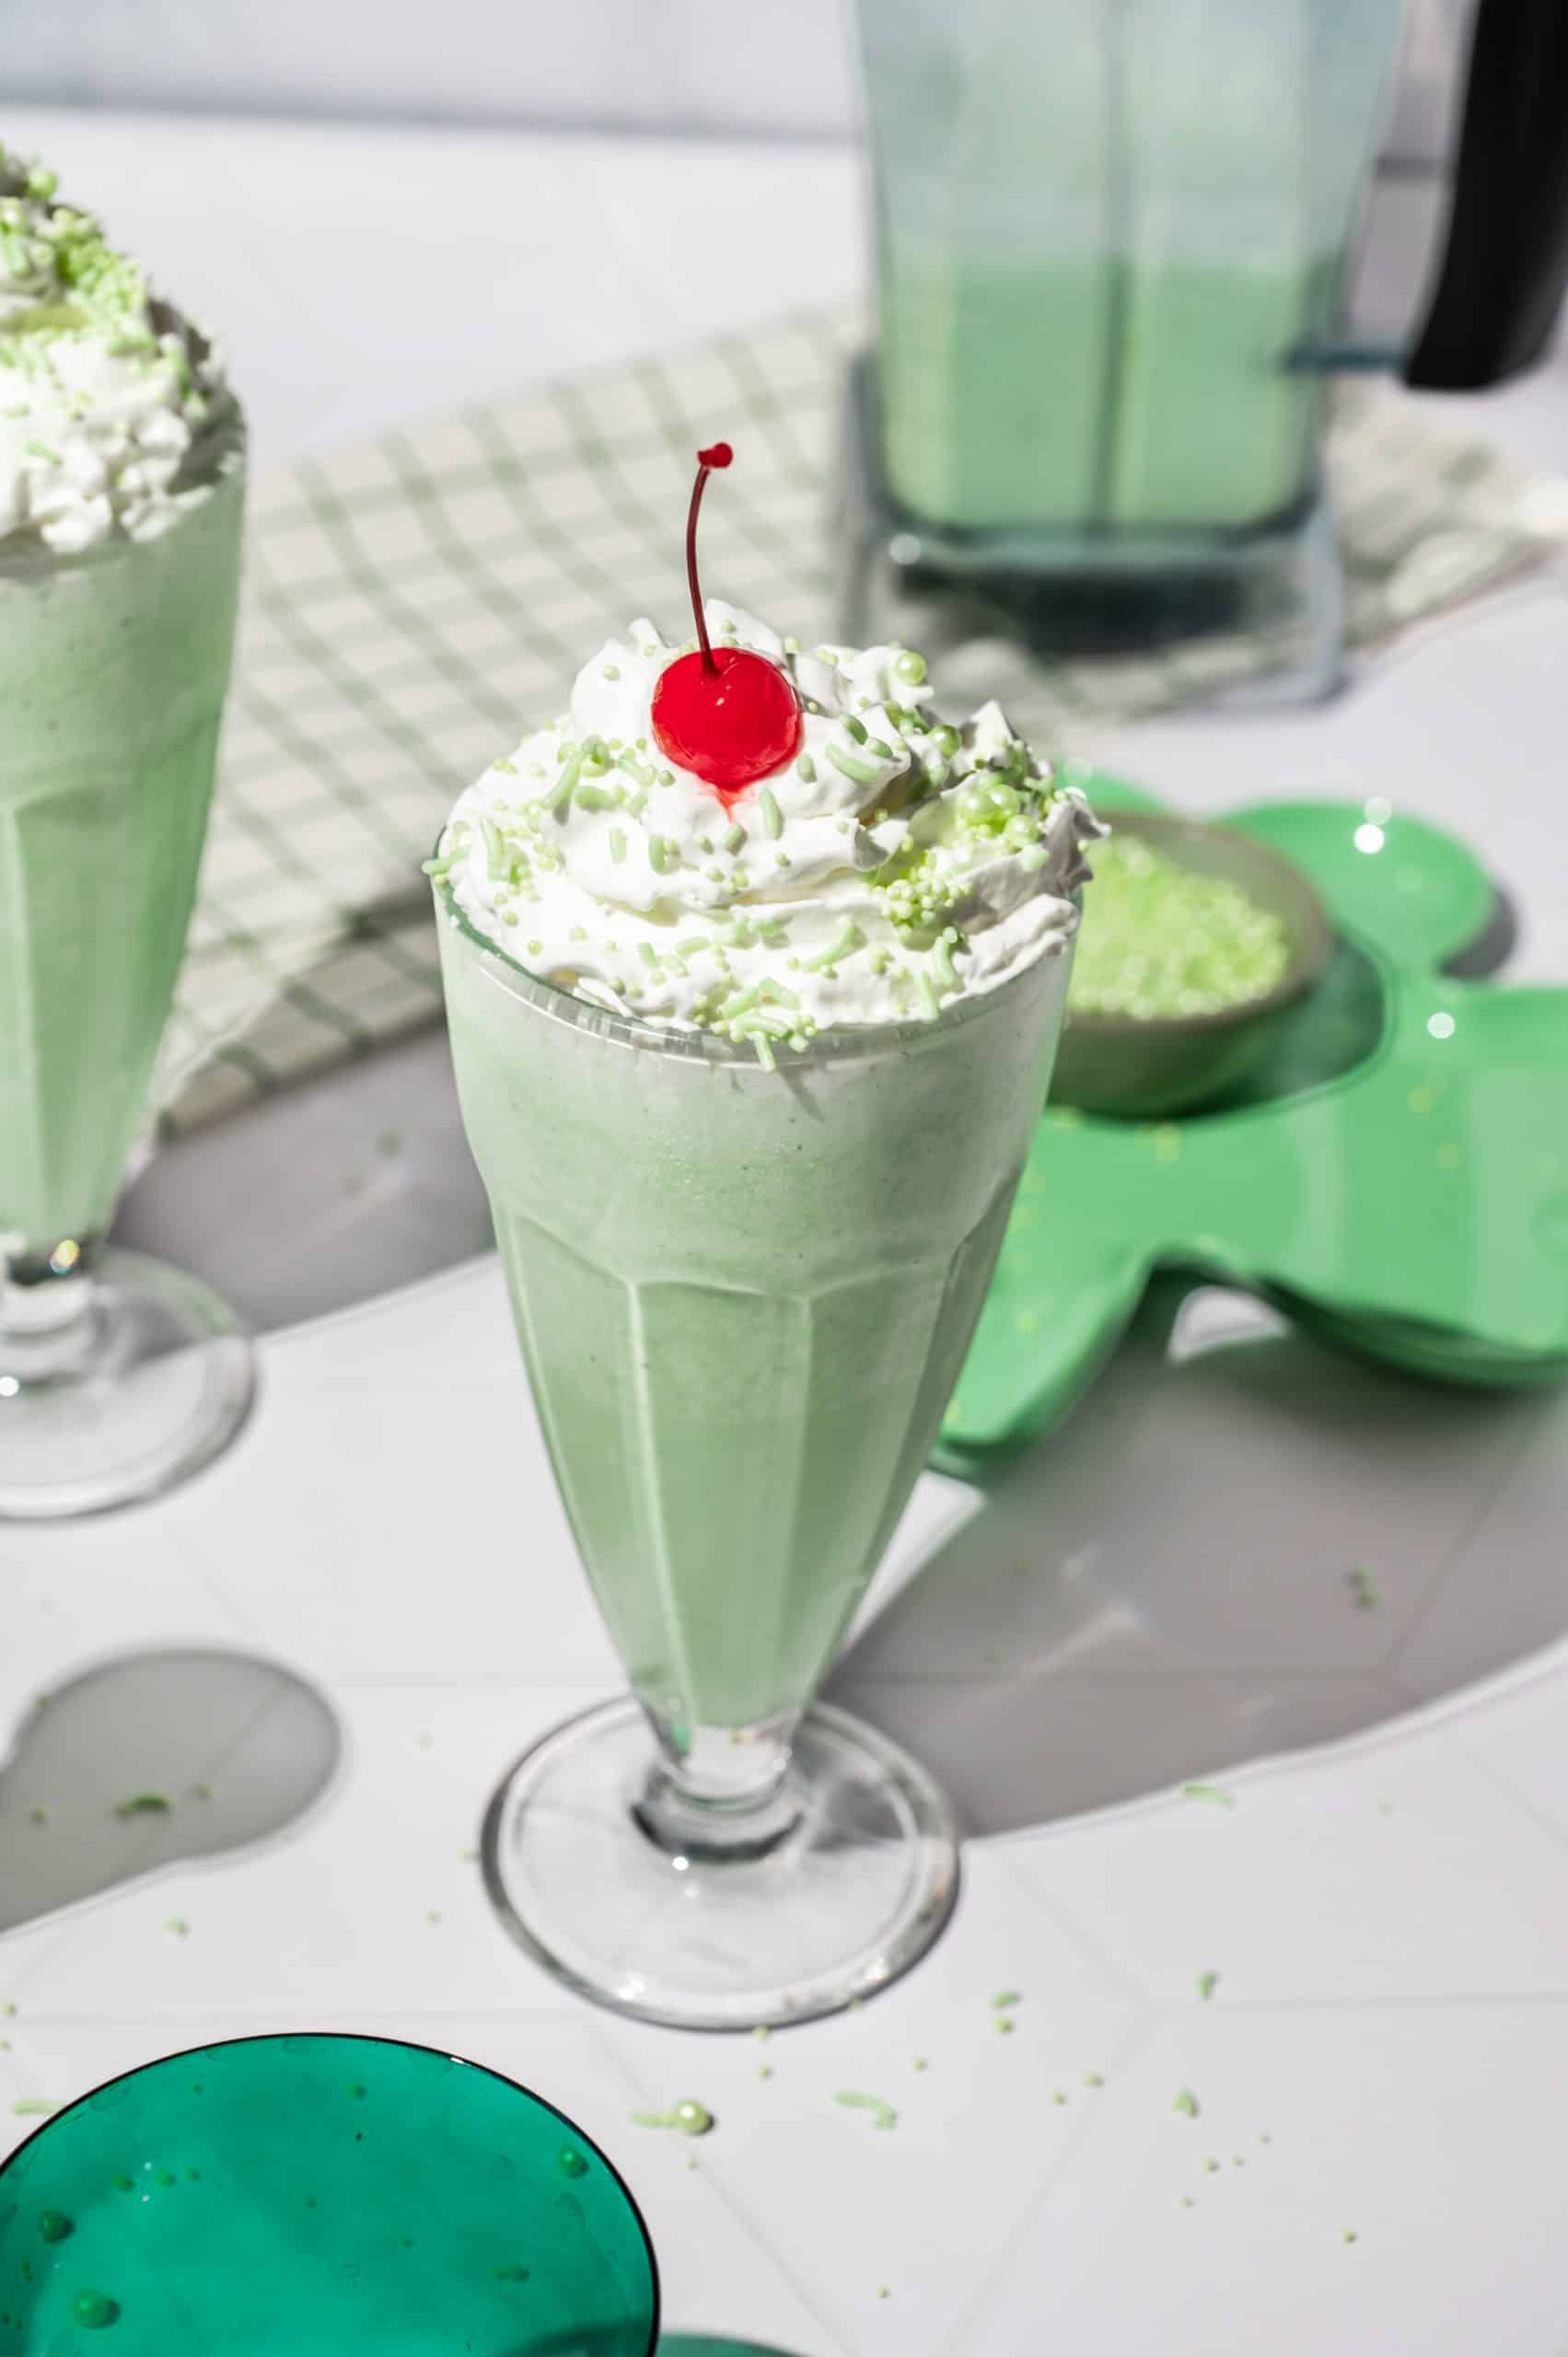 A shamrock shake in a milkshake glass with whipped cream, green sprinkles, and a cherry on top